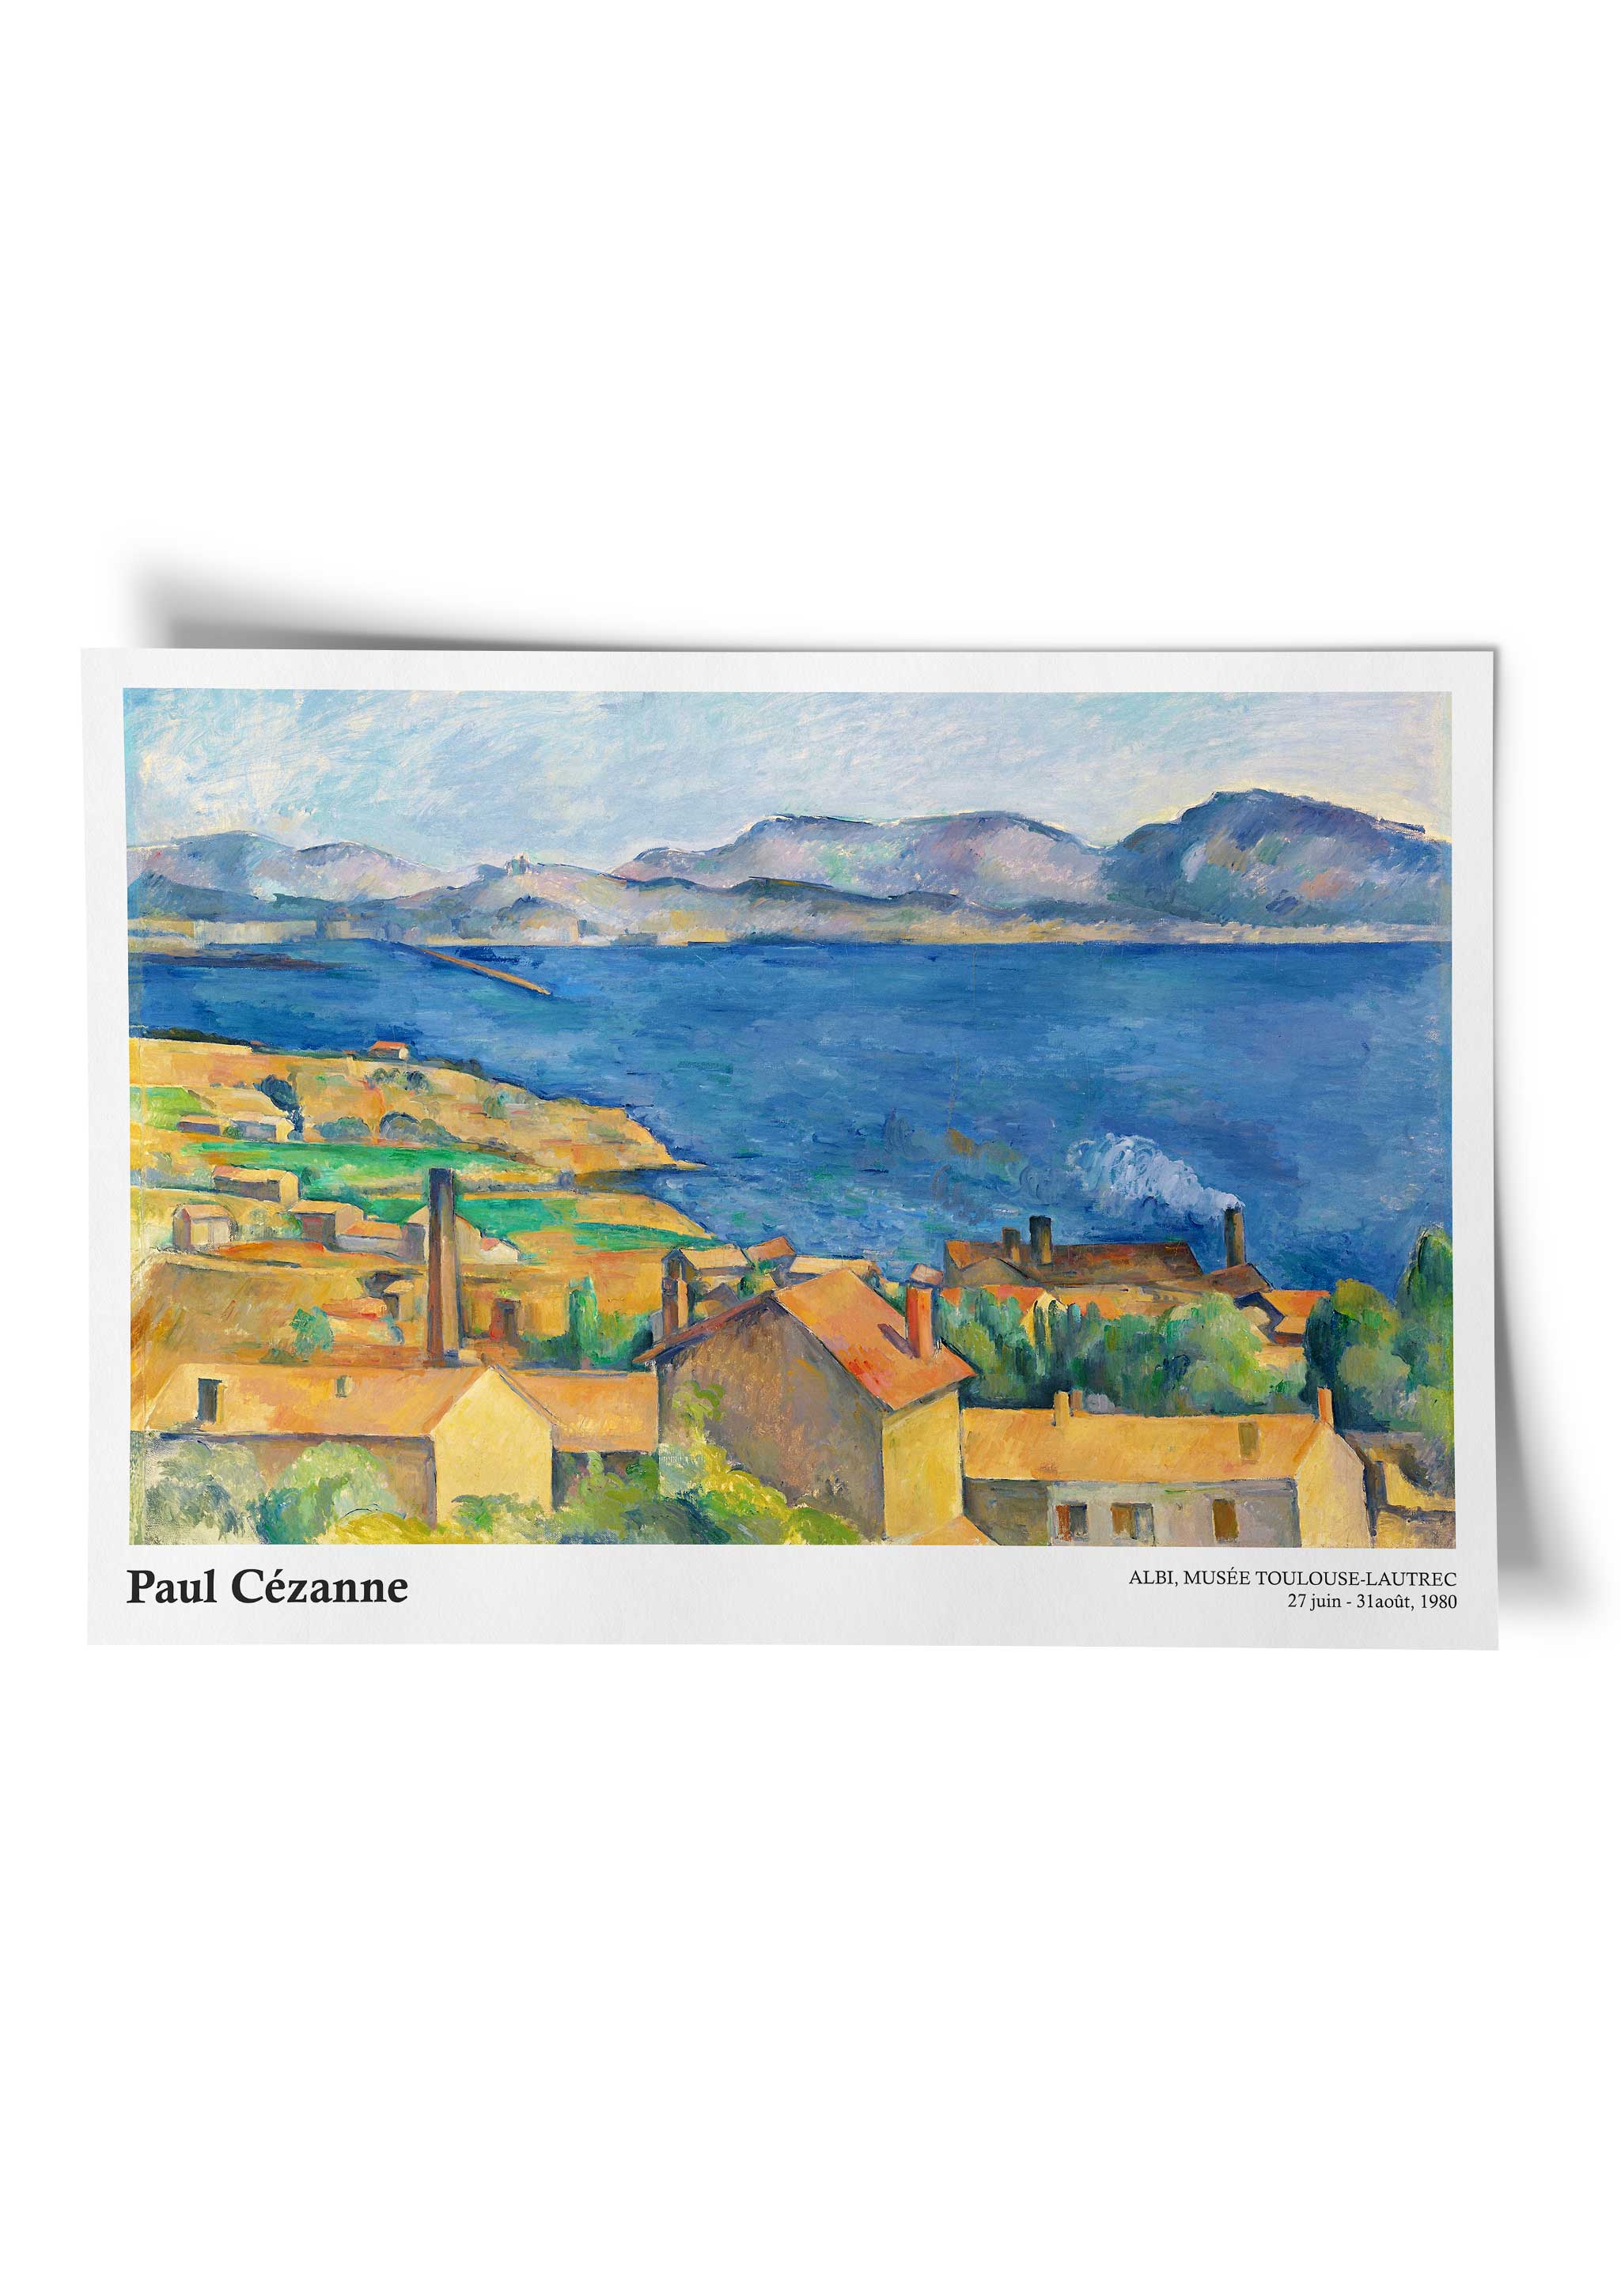 Paul Cezanne Exhibition Poster - The Bay of Marseilles